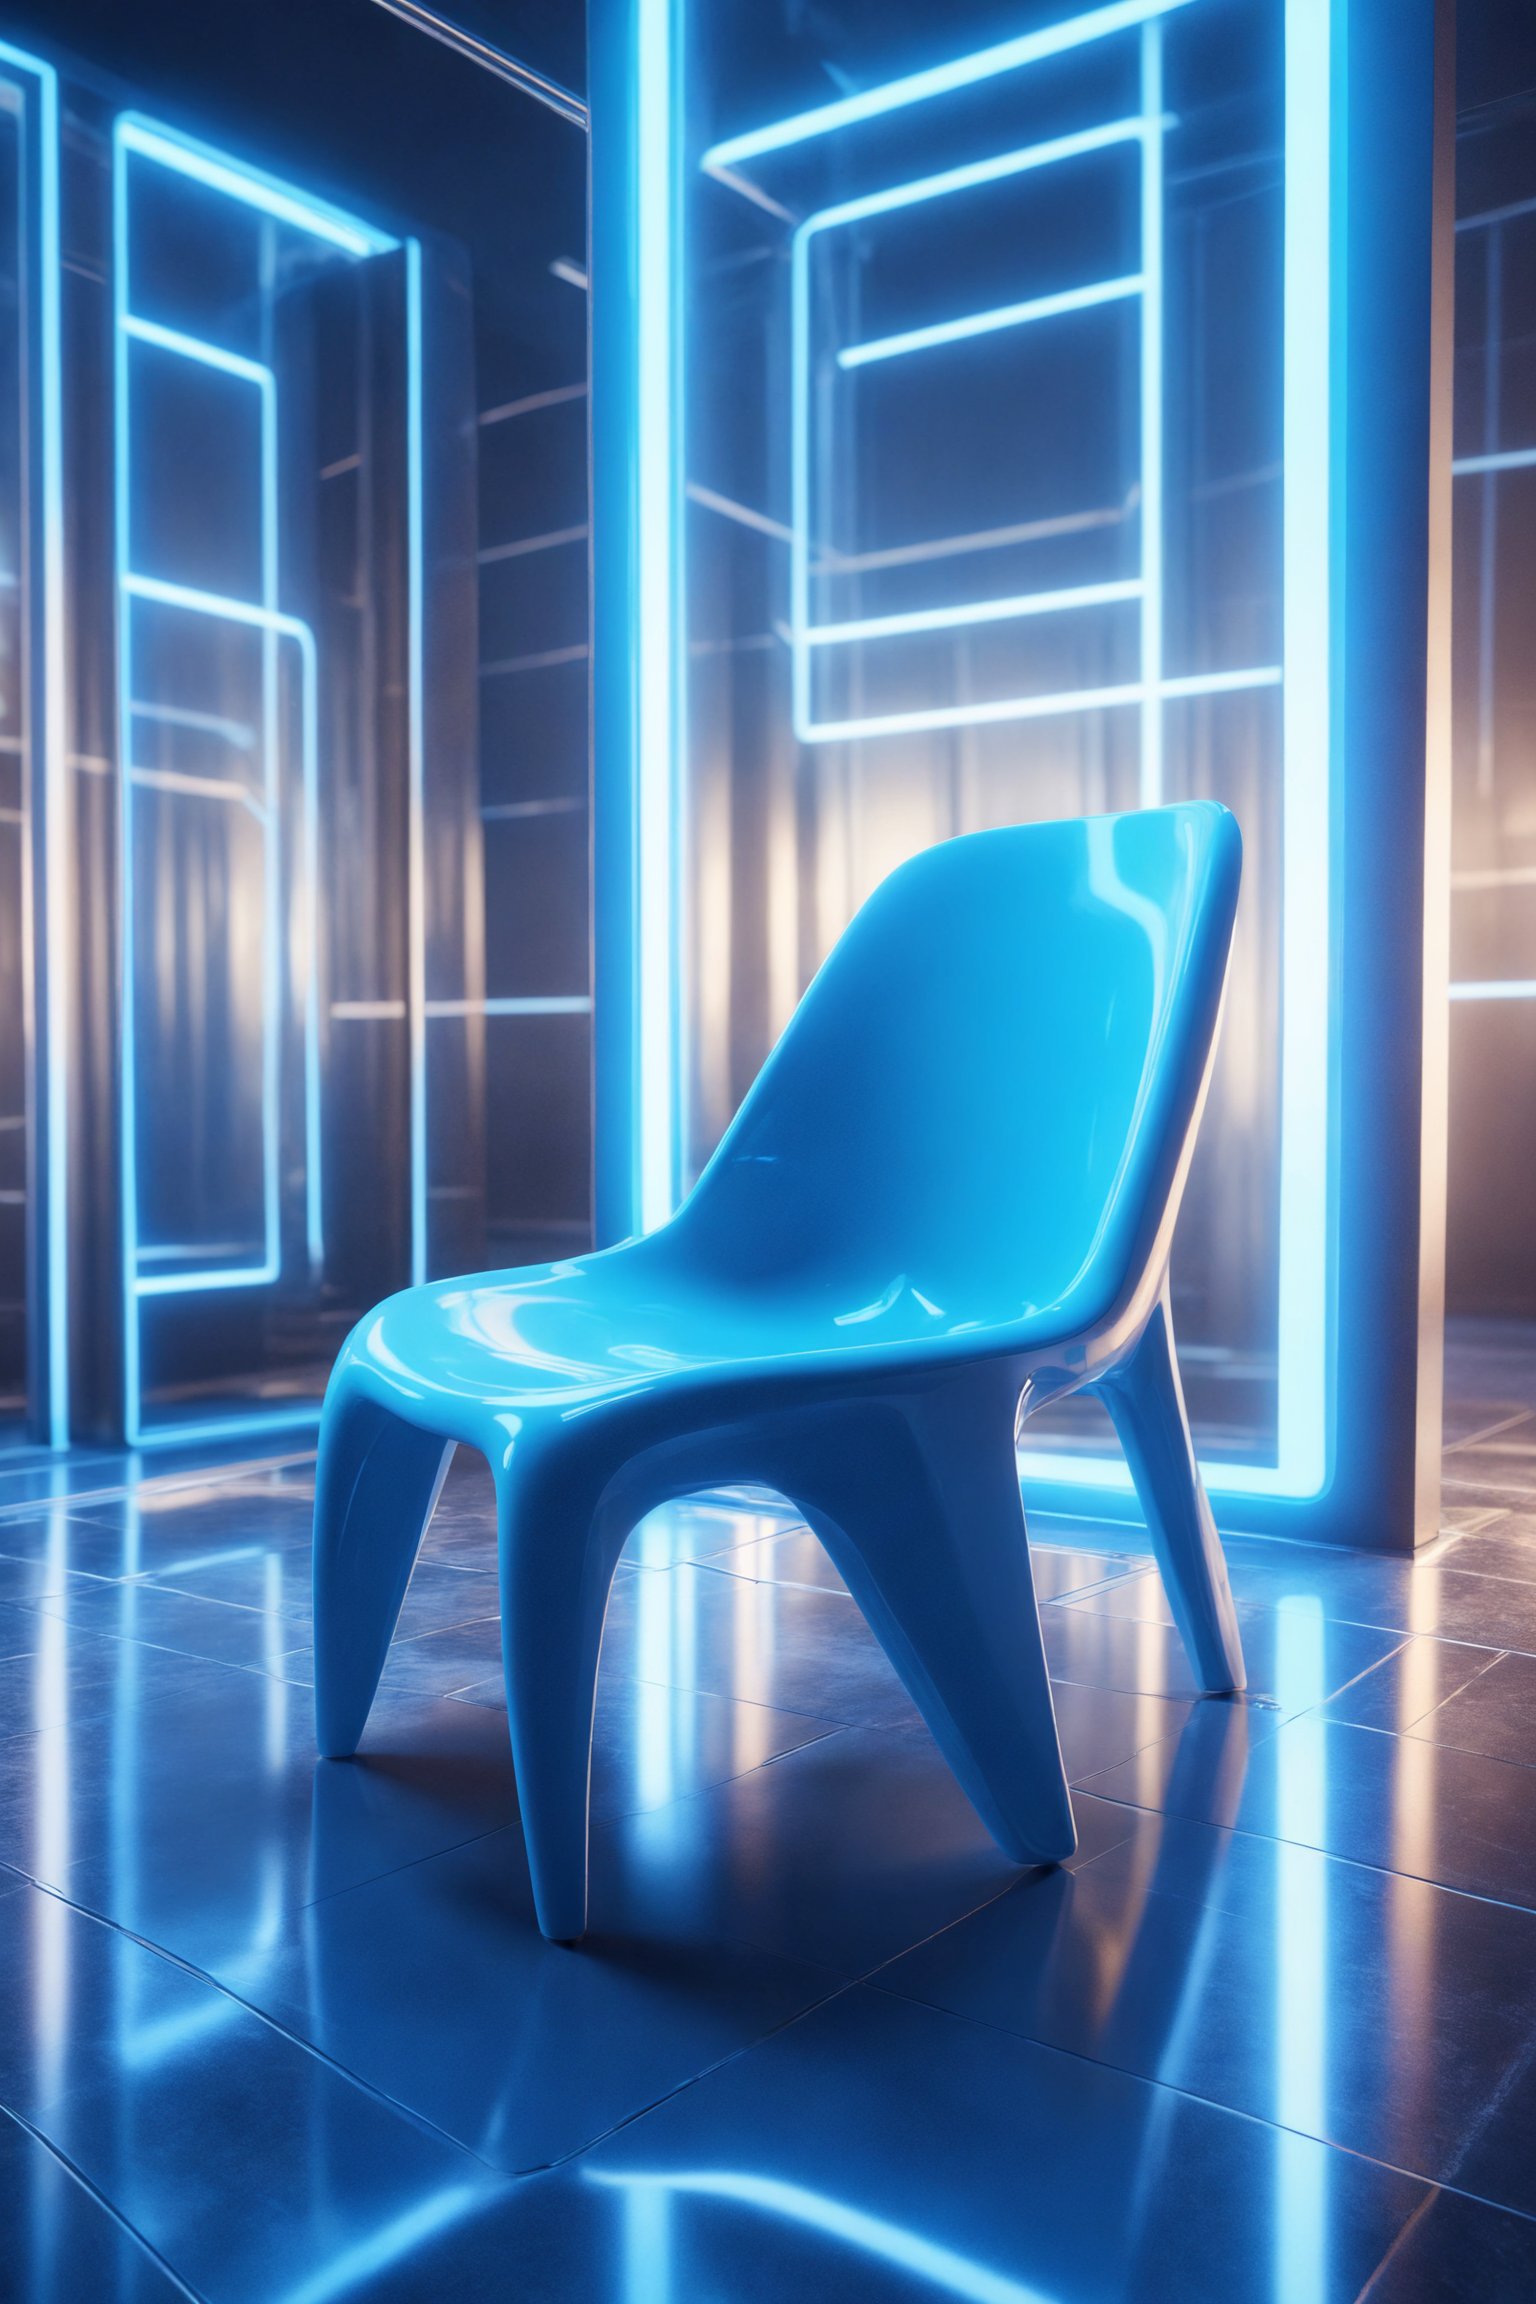 A futuristic organic shapes plastic chair blue parked on the mirror surface of an abstract geometric structure in a hightech style, surrounded by blue light strips, reflection photography, hyper quality, bright background, advertising photography, advertising poster, high resolution, hyperrealistic rendering